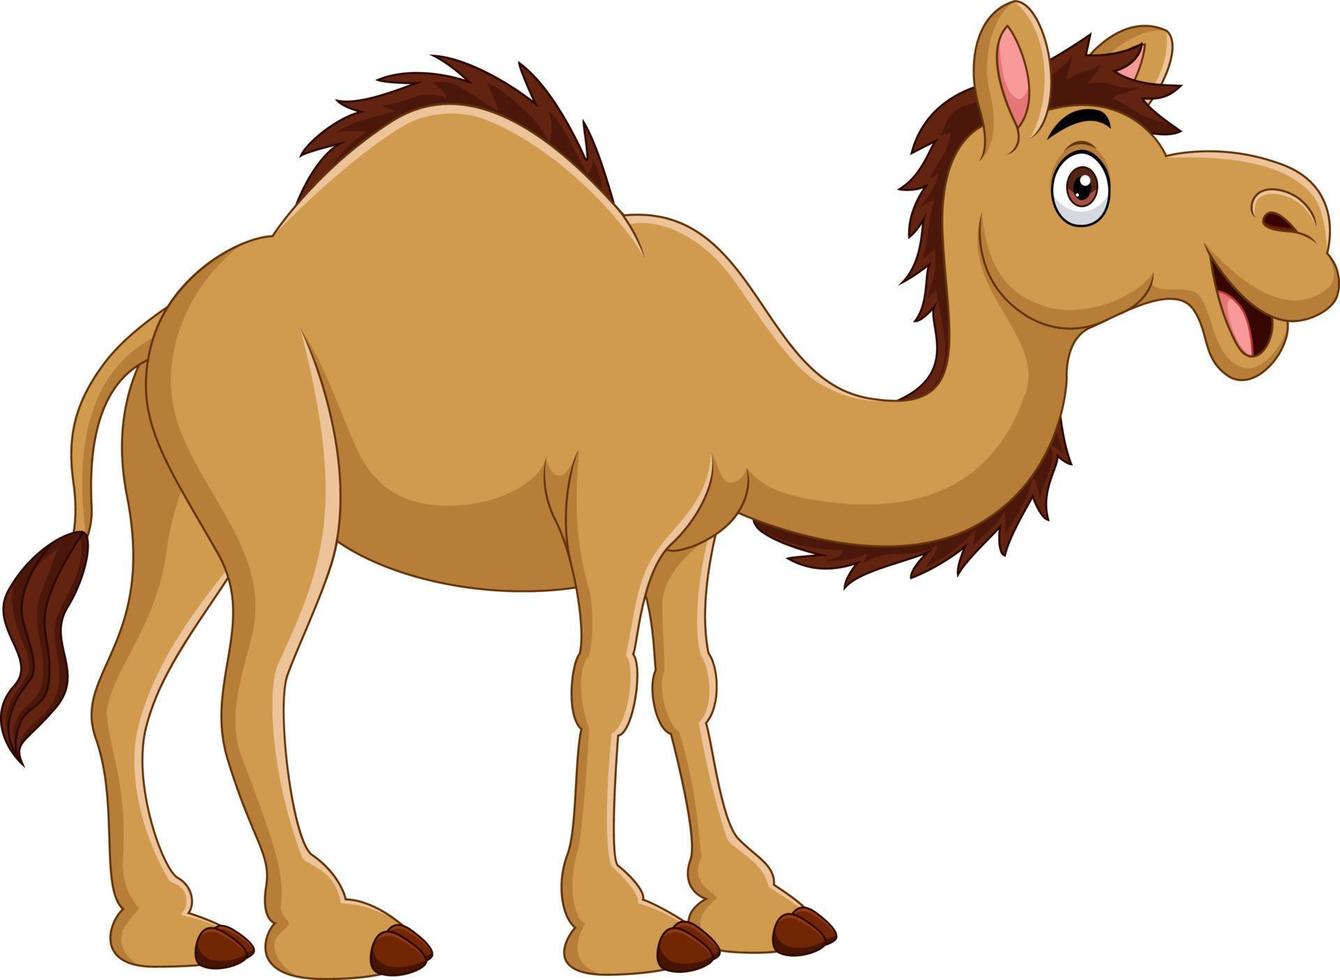 Cartoon camel isolated on white background vector